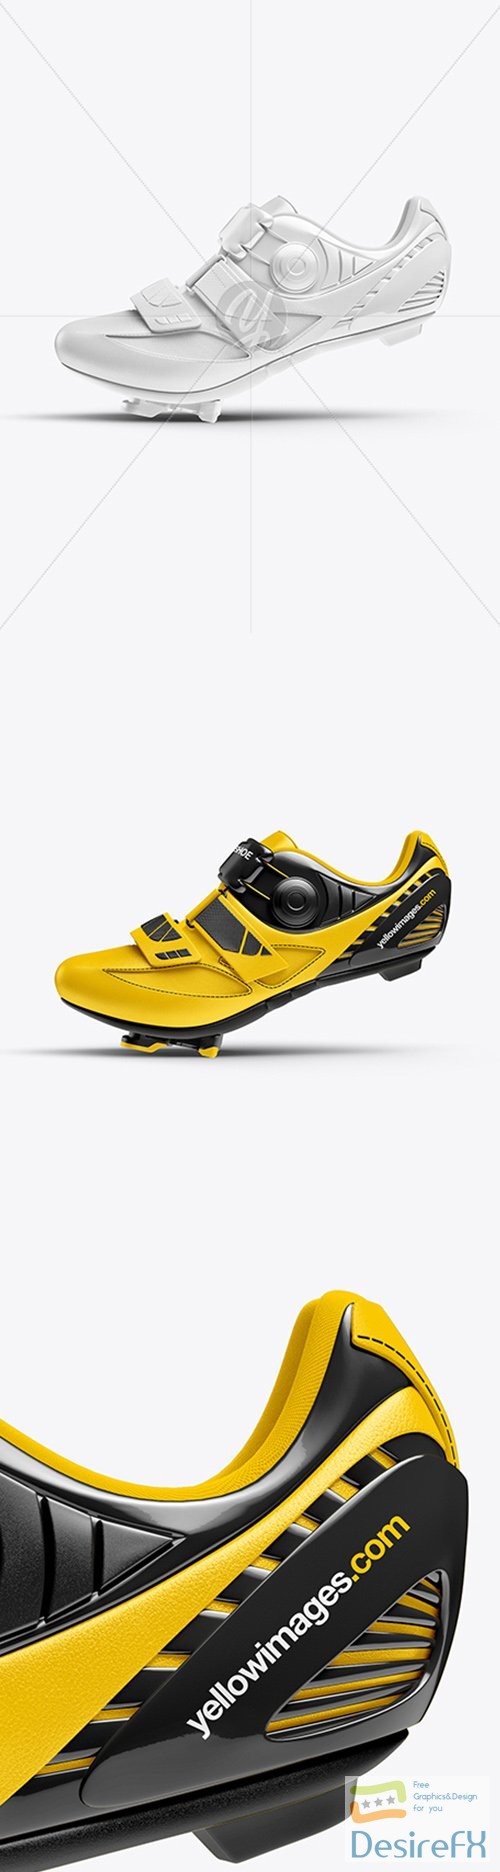 Download Download CYCLING SHOE MOCKUP - SIDE VIEW 31323 | DesireFX.COM